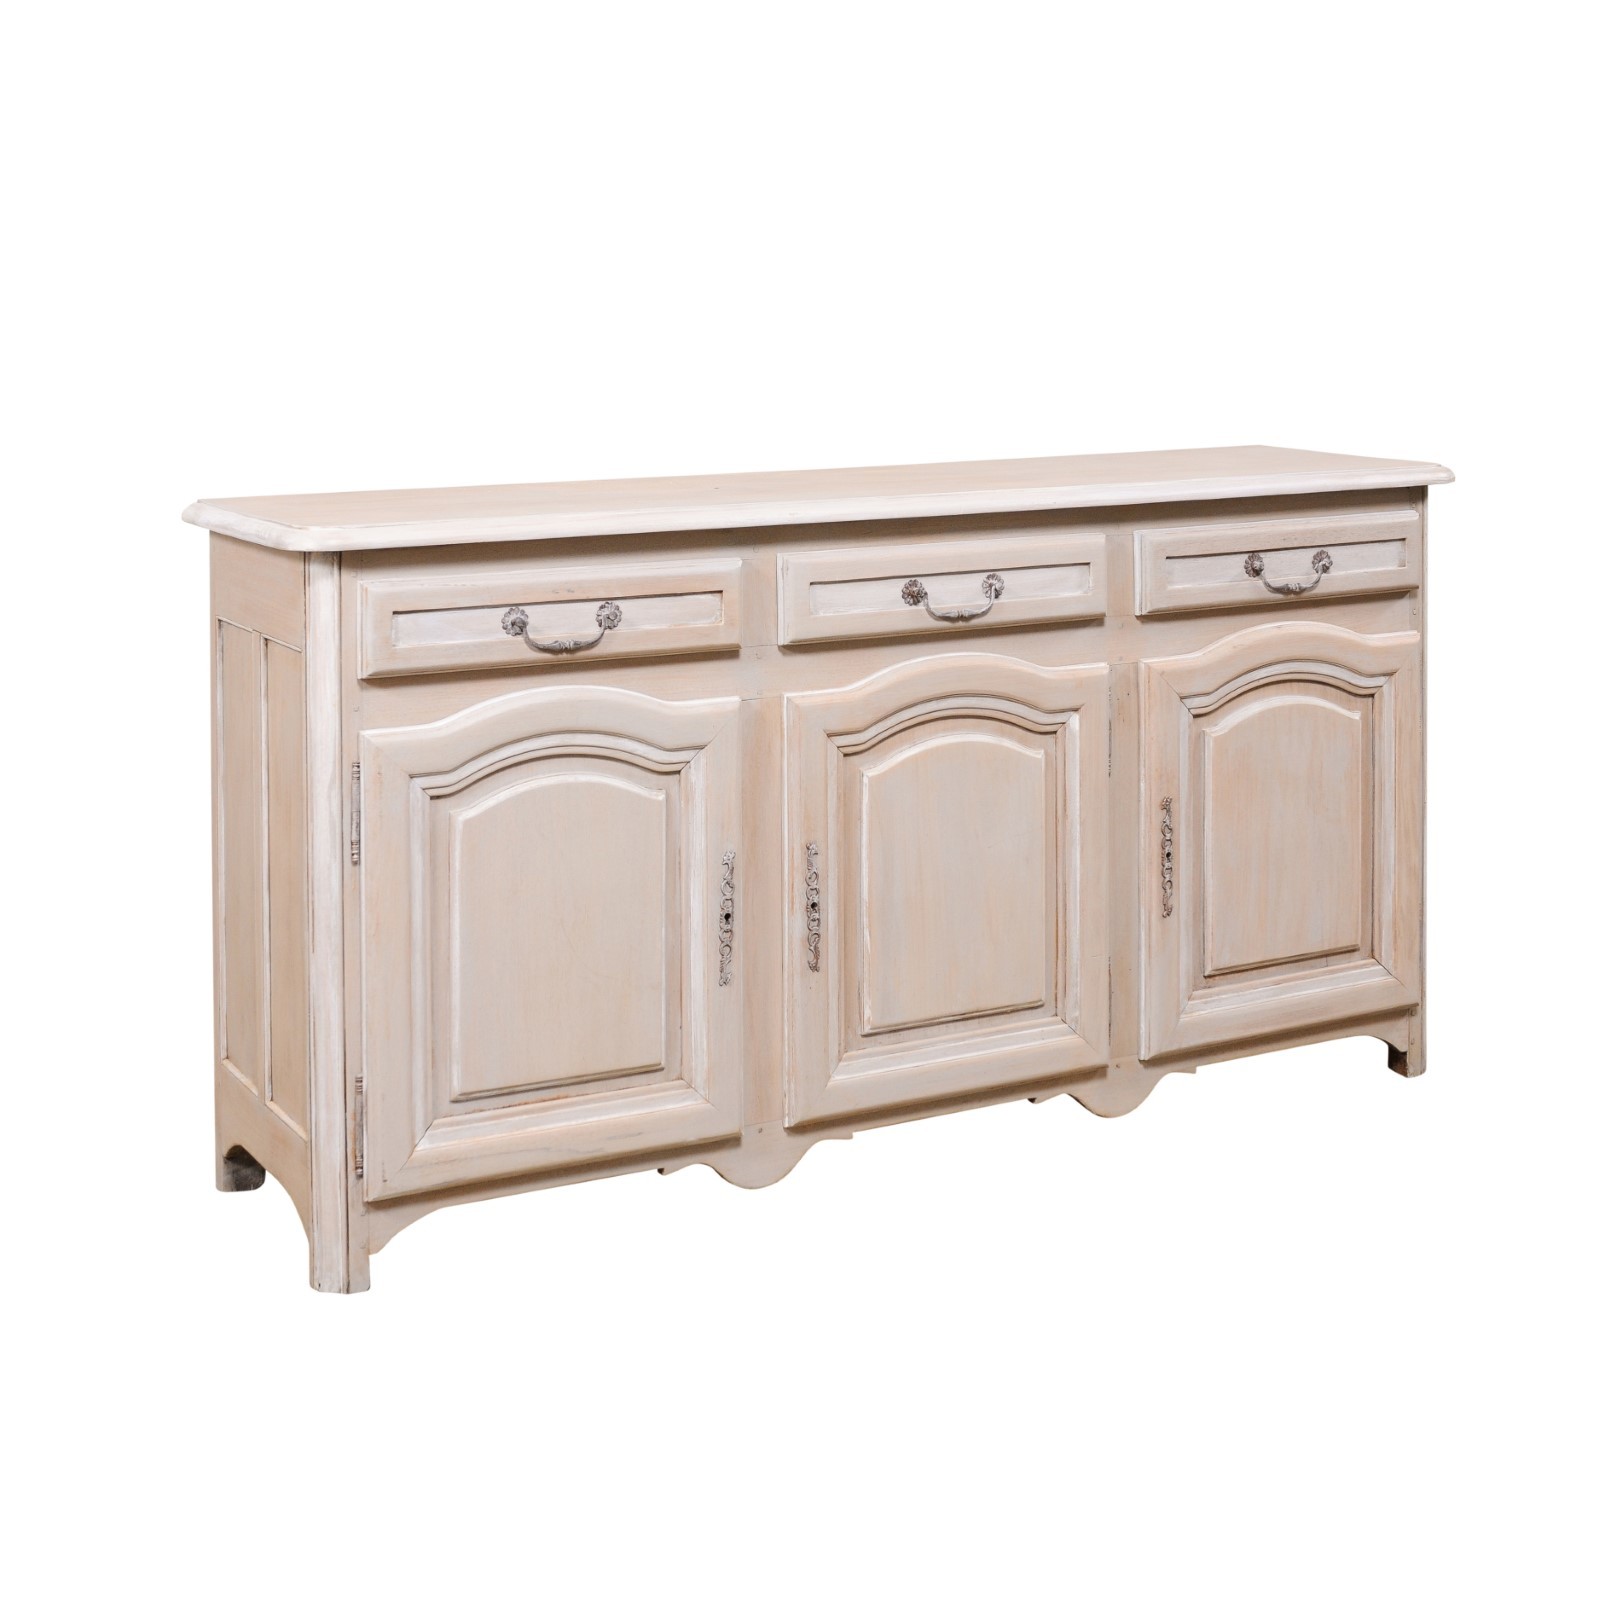 French Painted Wood Buffet w/ Arched Doors